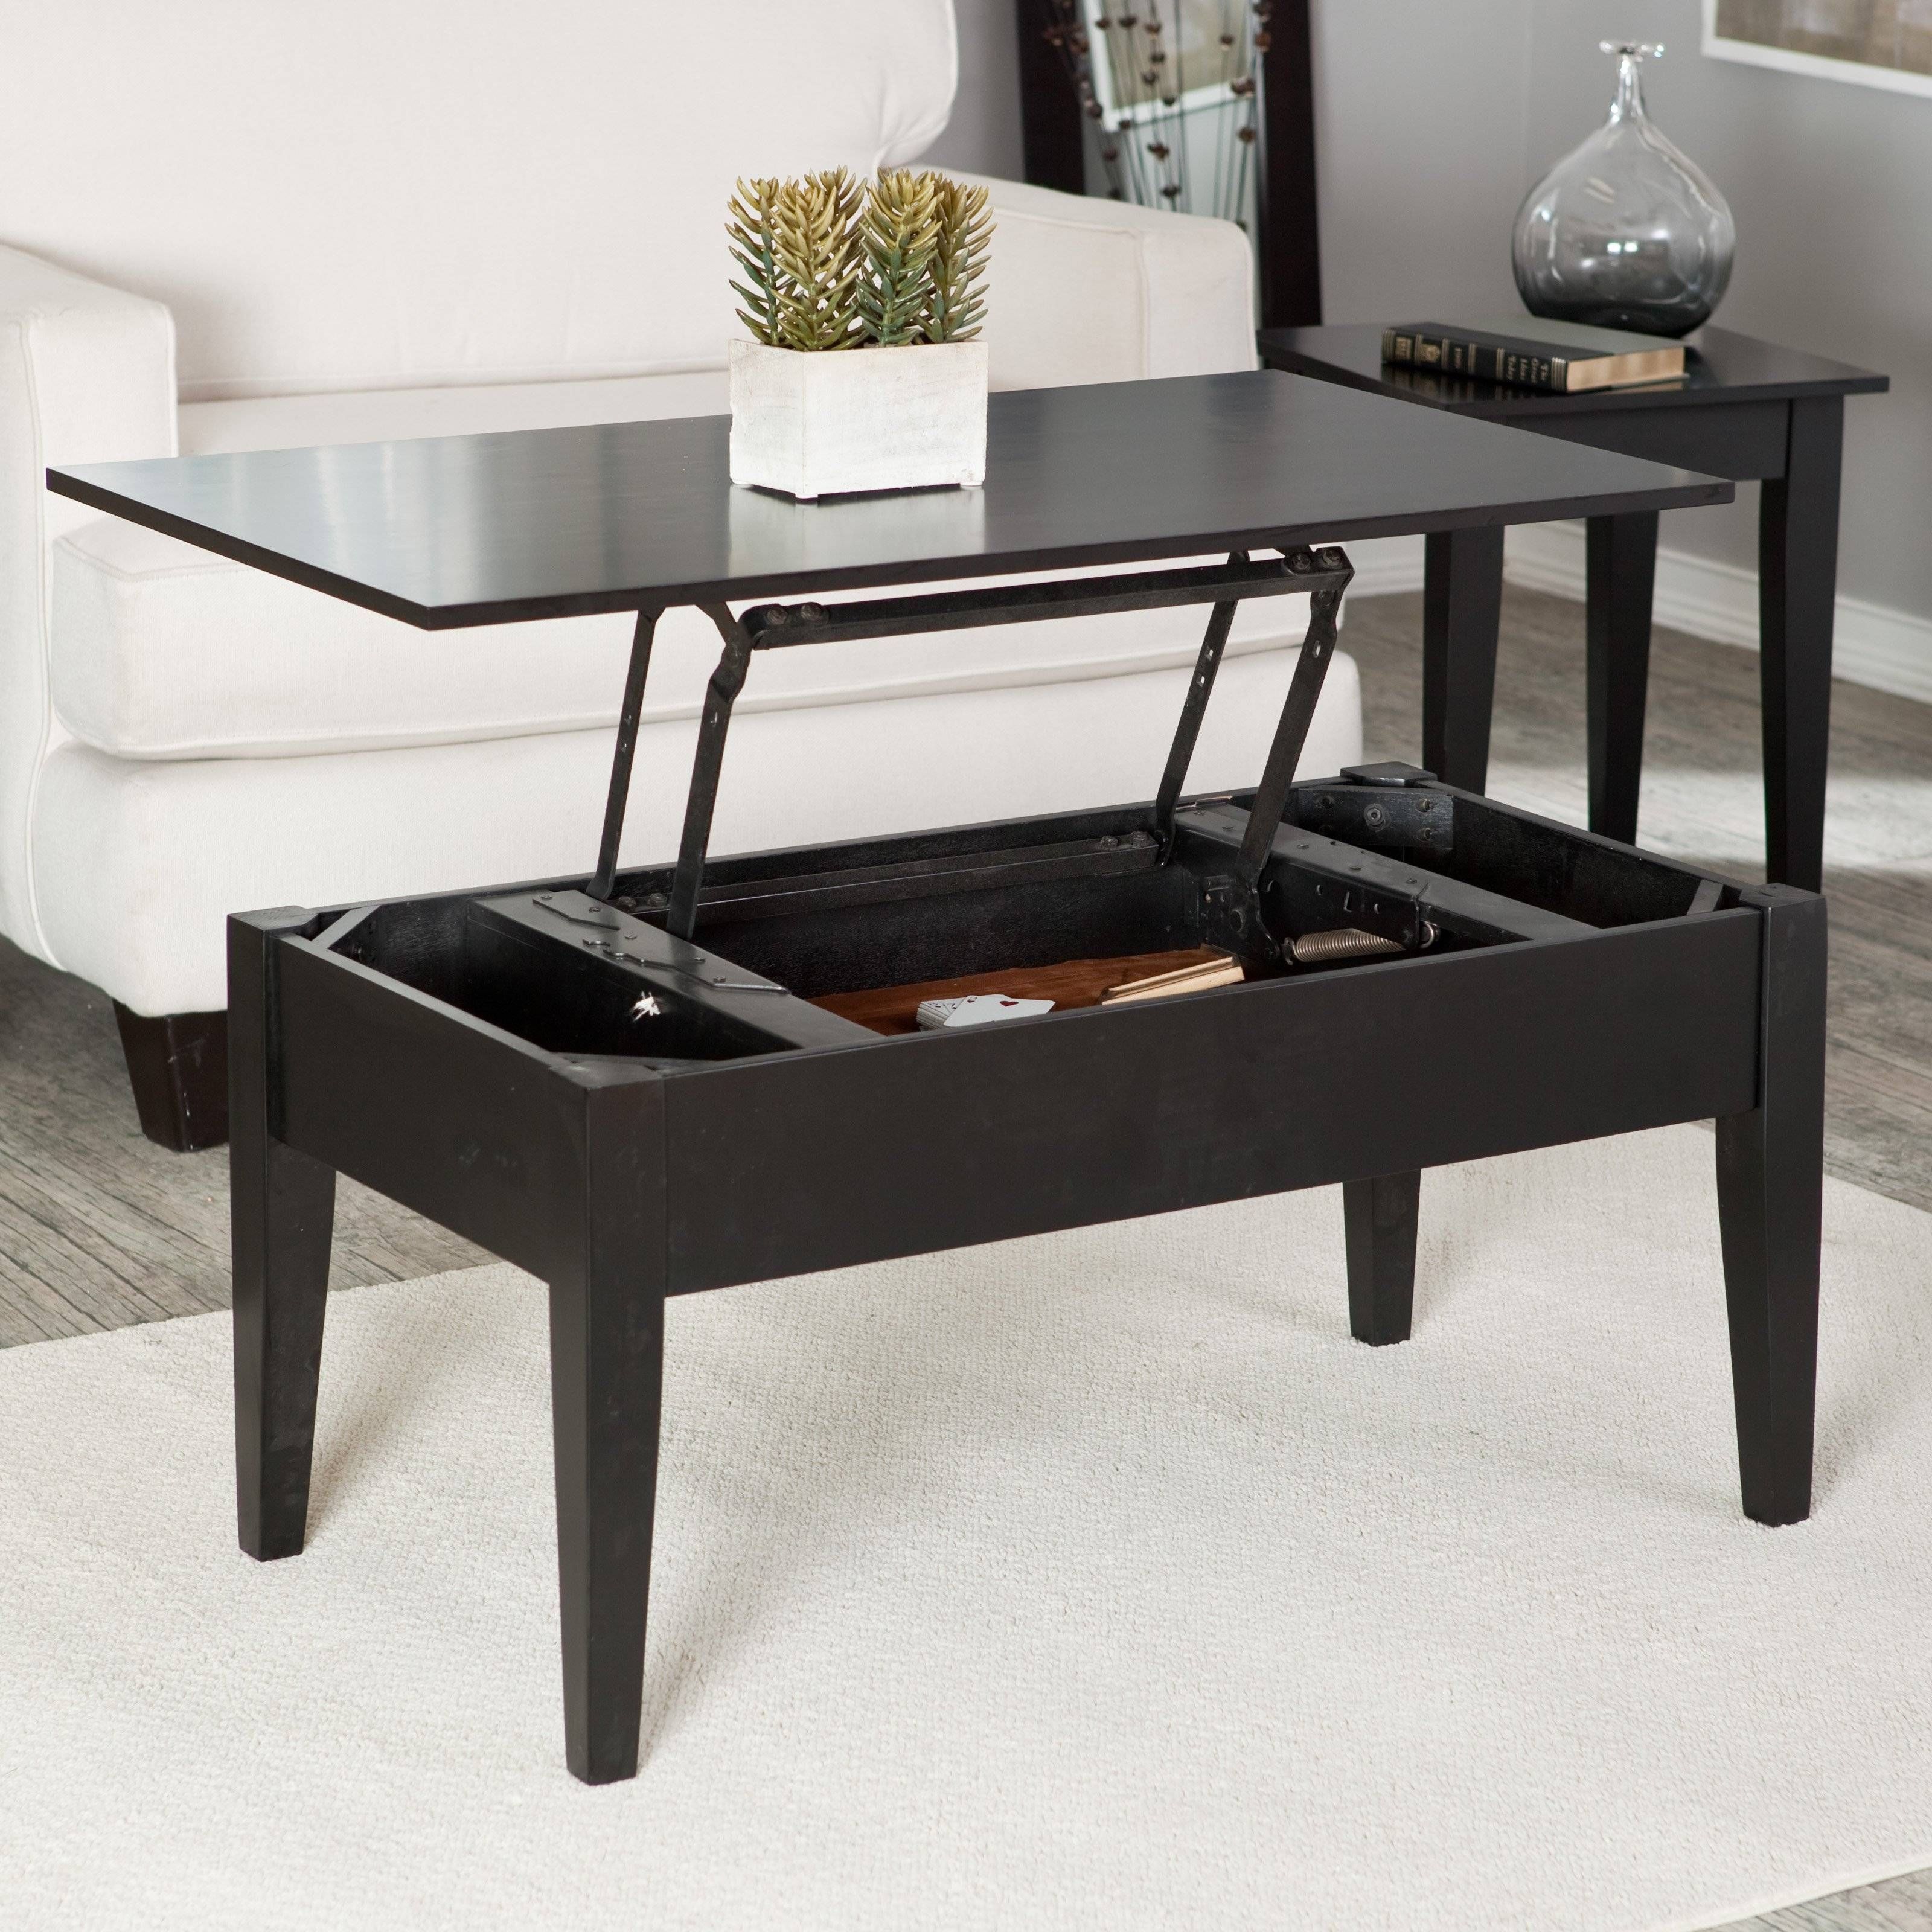 Turner Lift Top Coffee Table – Espresso | Hayneedle Throughout Coffee Tables With Lift Up Top (View 1 of 30)